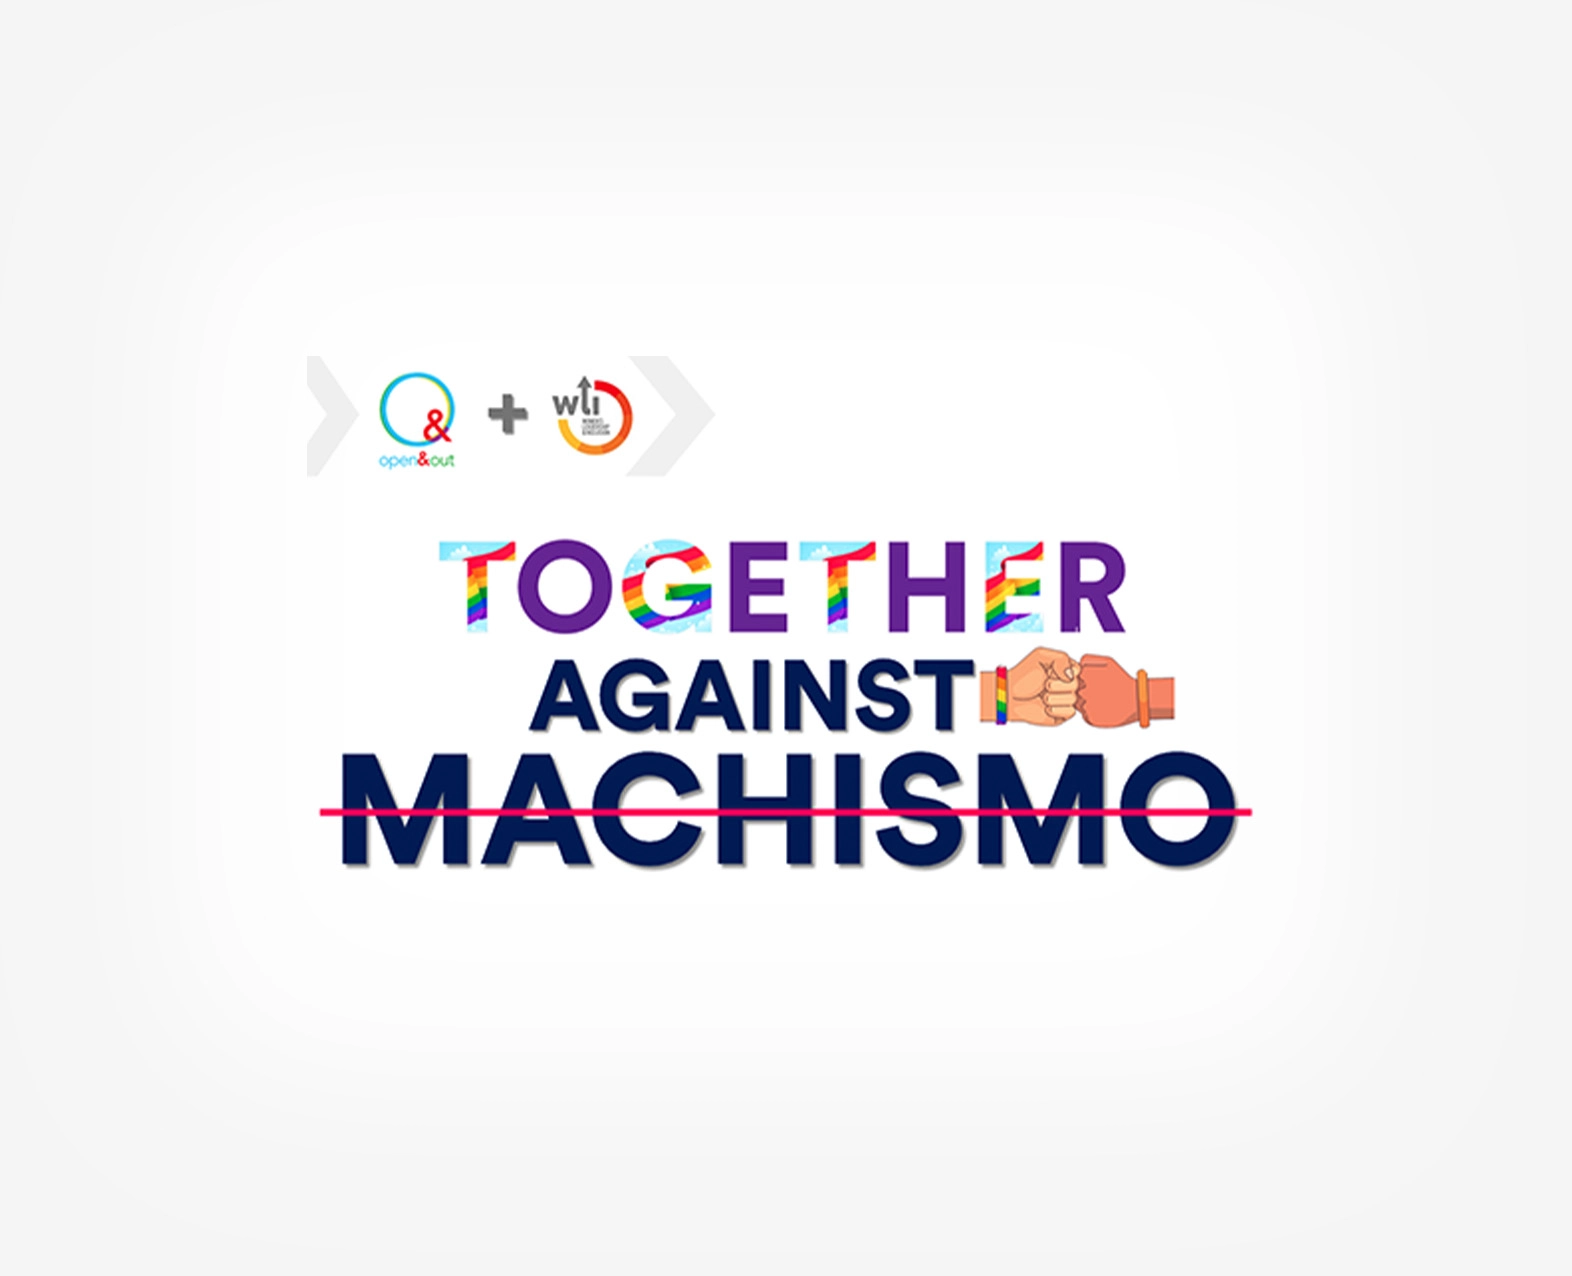 Graphic promoting 'Together Against Machismo' by Open&Out and WLI. (photo)